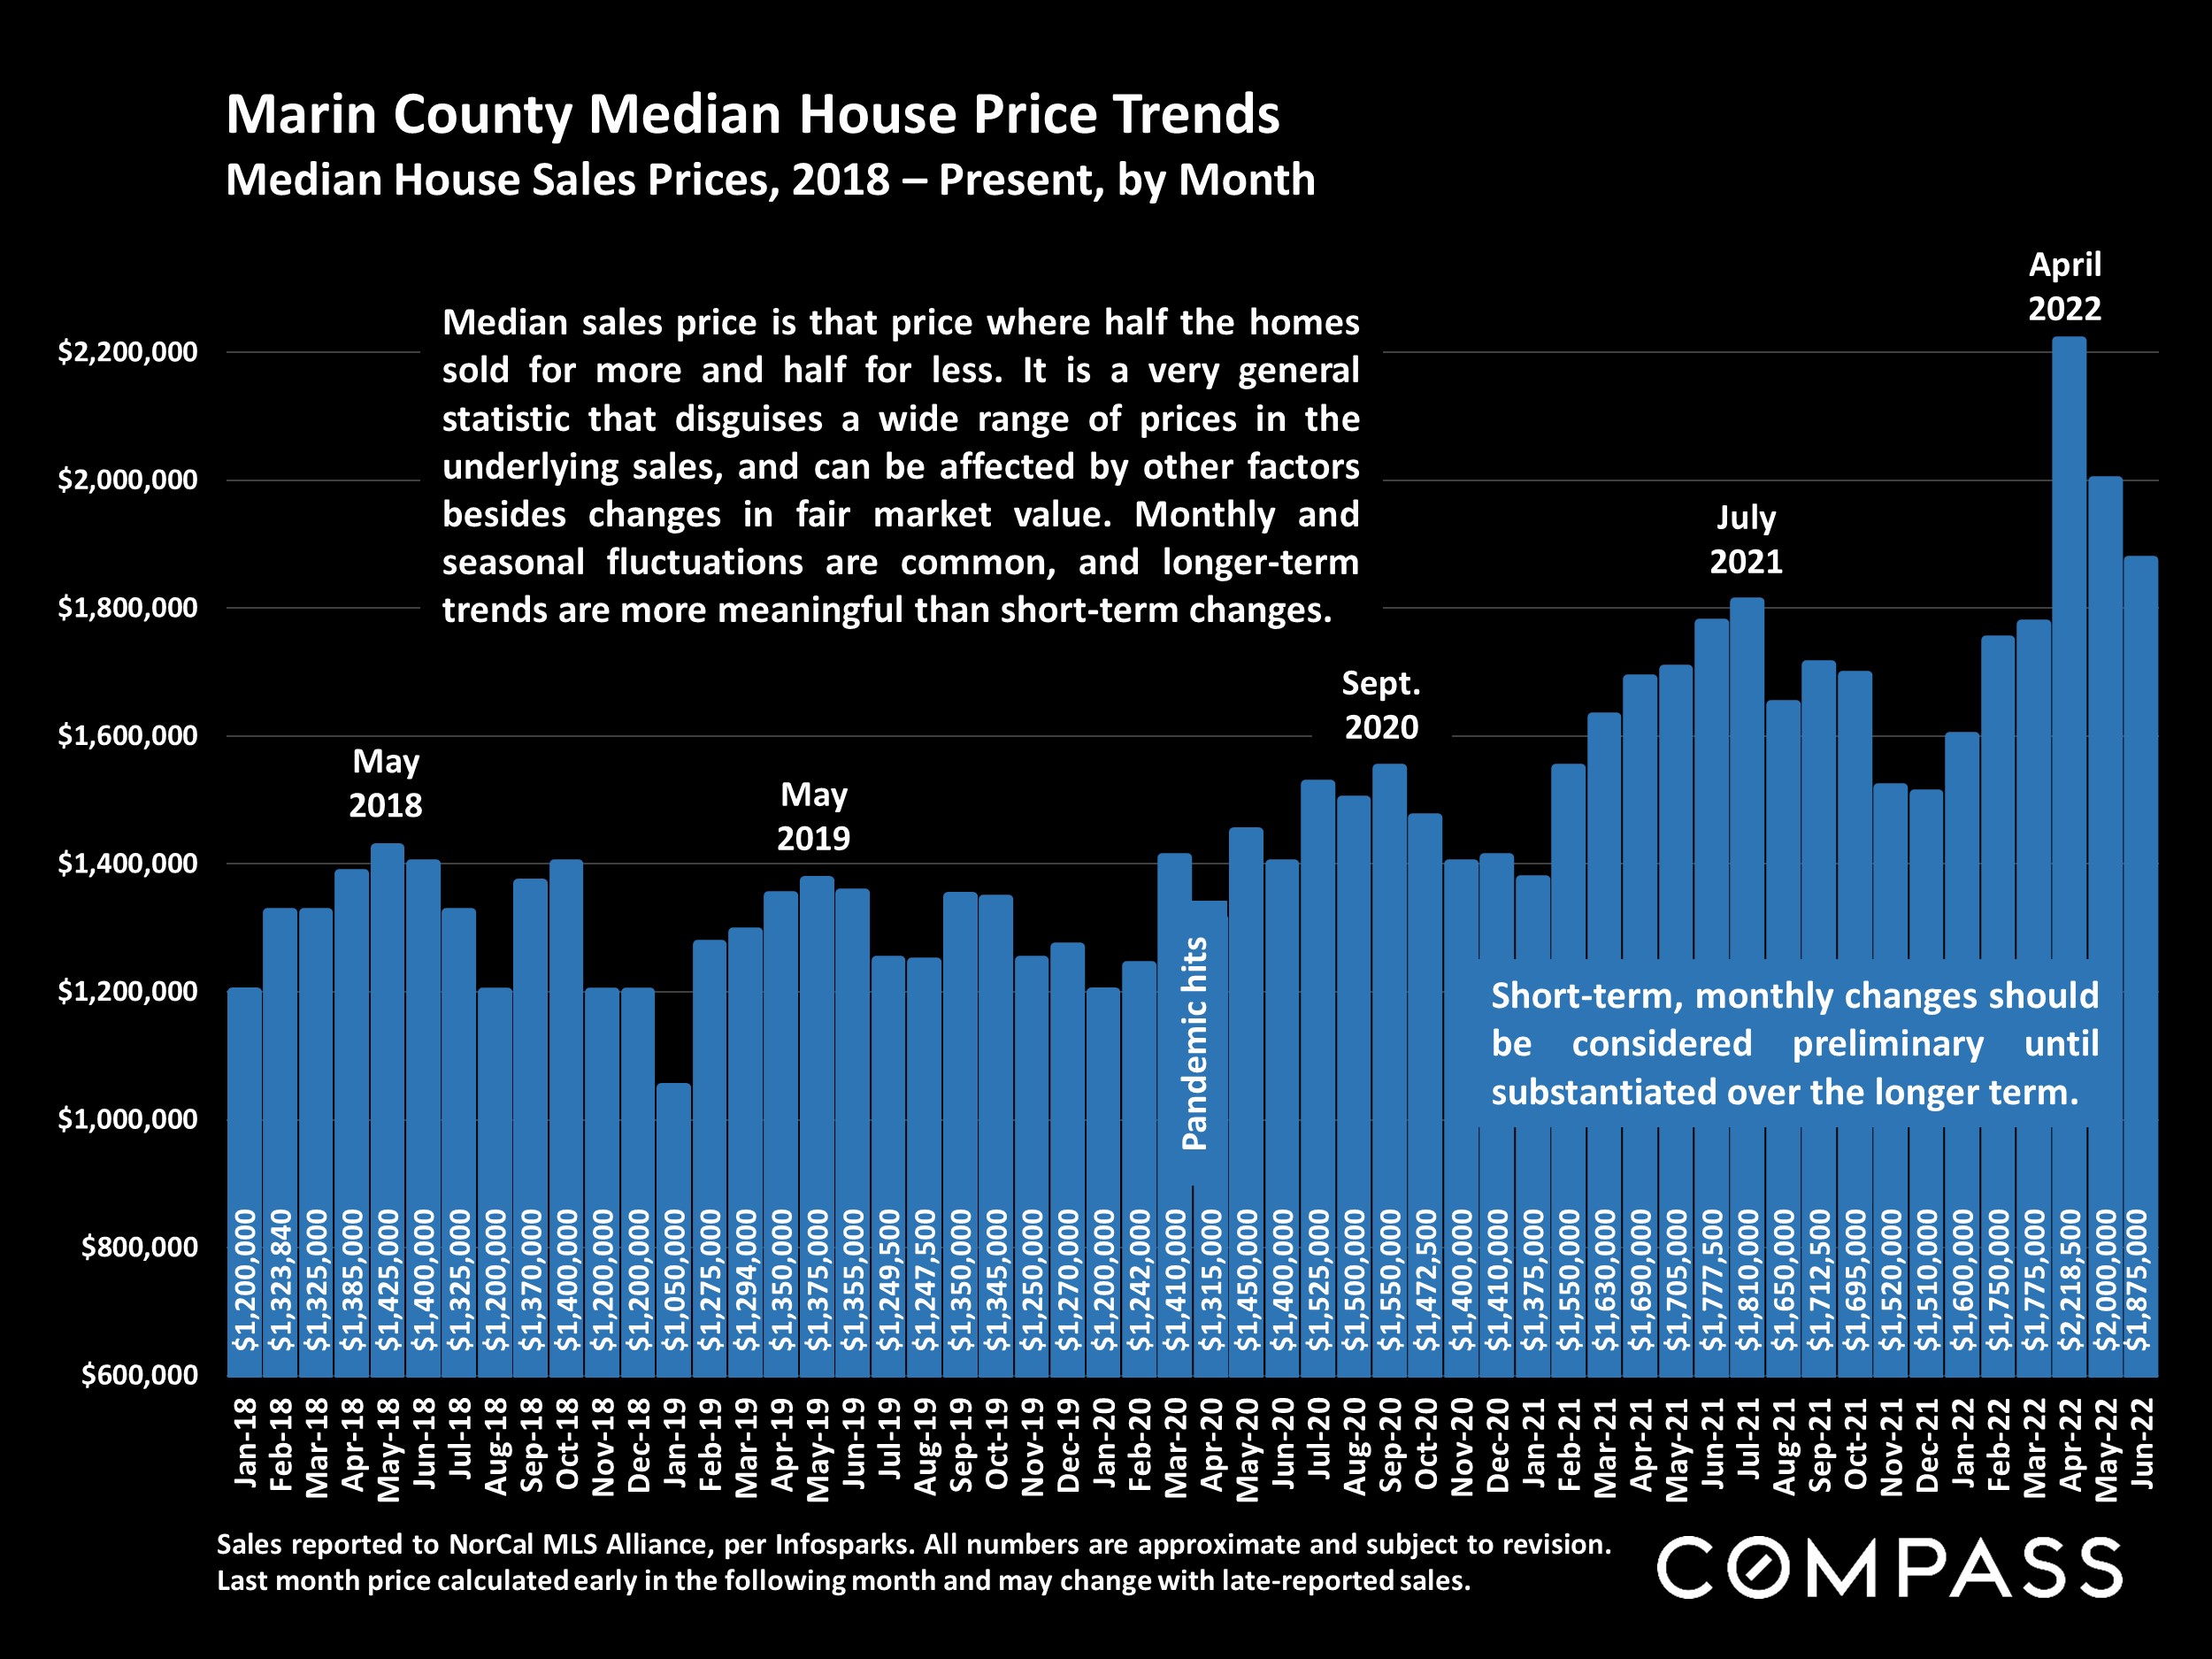 Slide showing Marin County Median House Price Trends